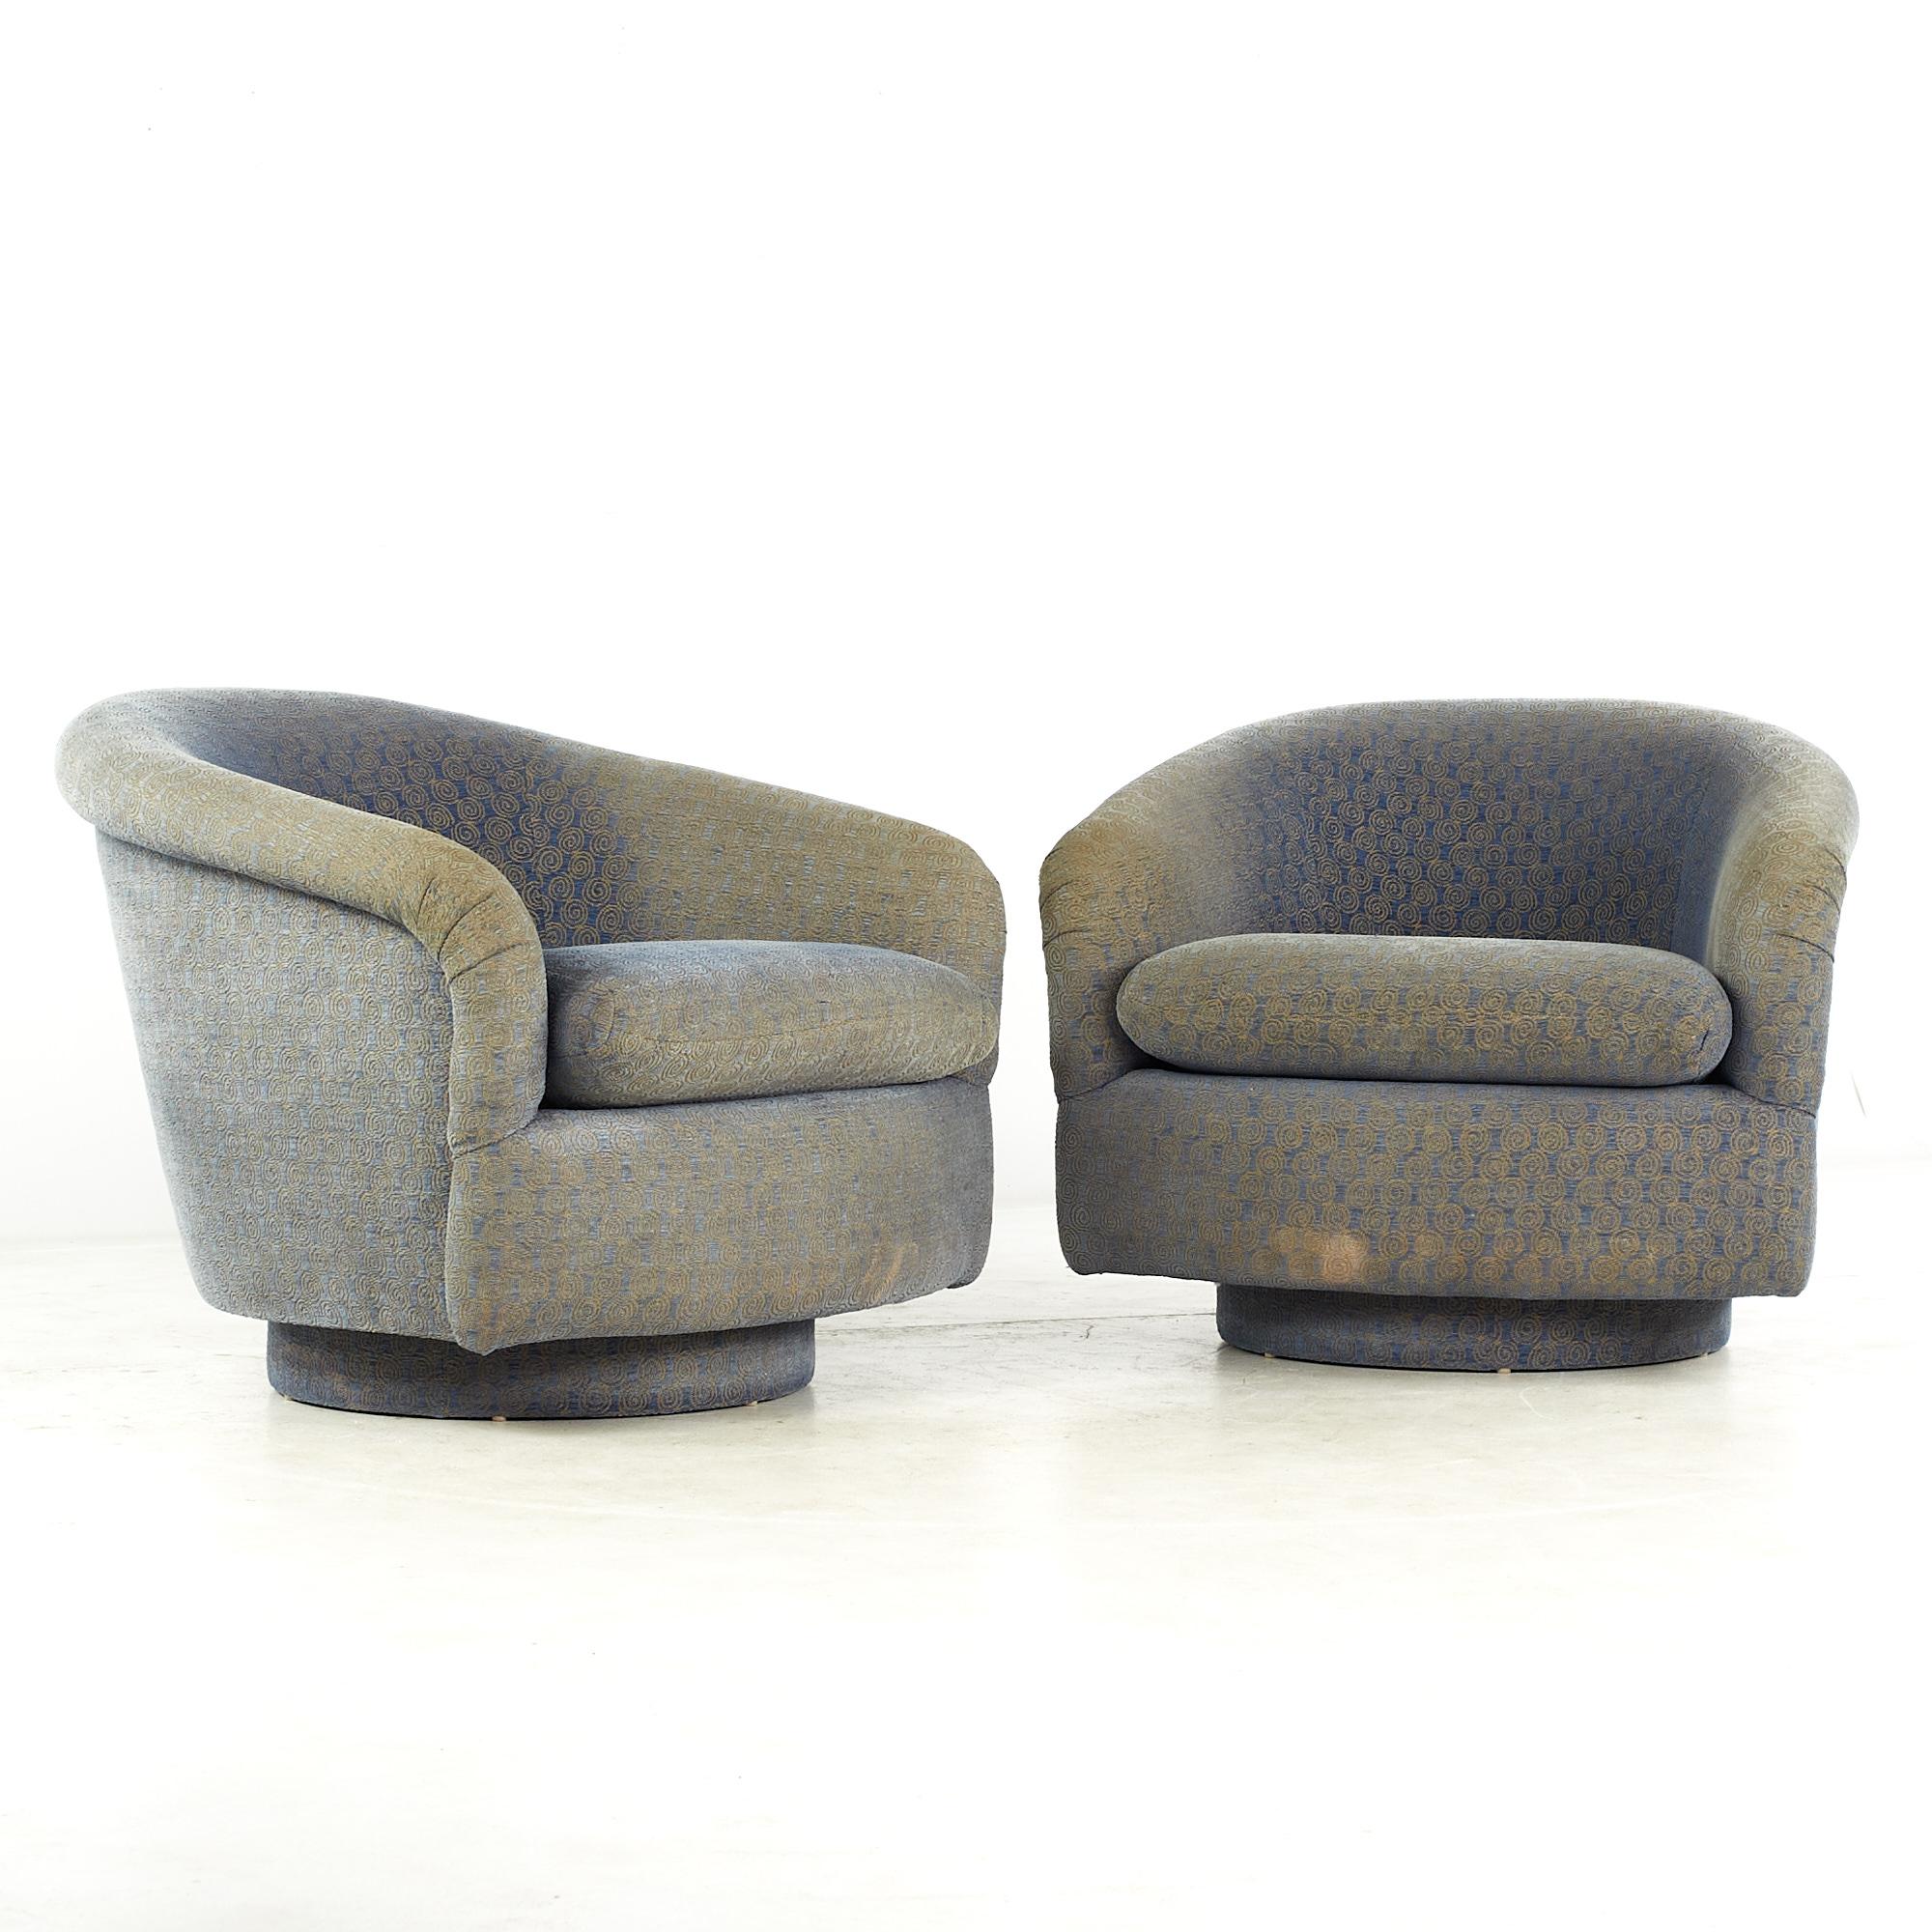 Milo Baughman Style Mid Century Swivel Barrel Lounge chairs - pair

This chair measures: 34.5 wide x 36 deep x 28.5 high, with a seat height of 18 and arm height/chair clearance 24 inches

All pieces of furniture can be had in what we call